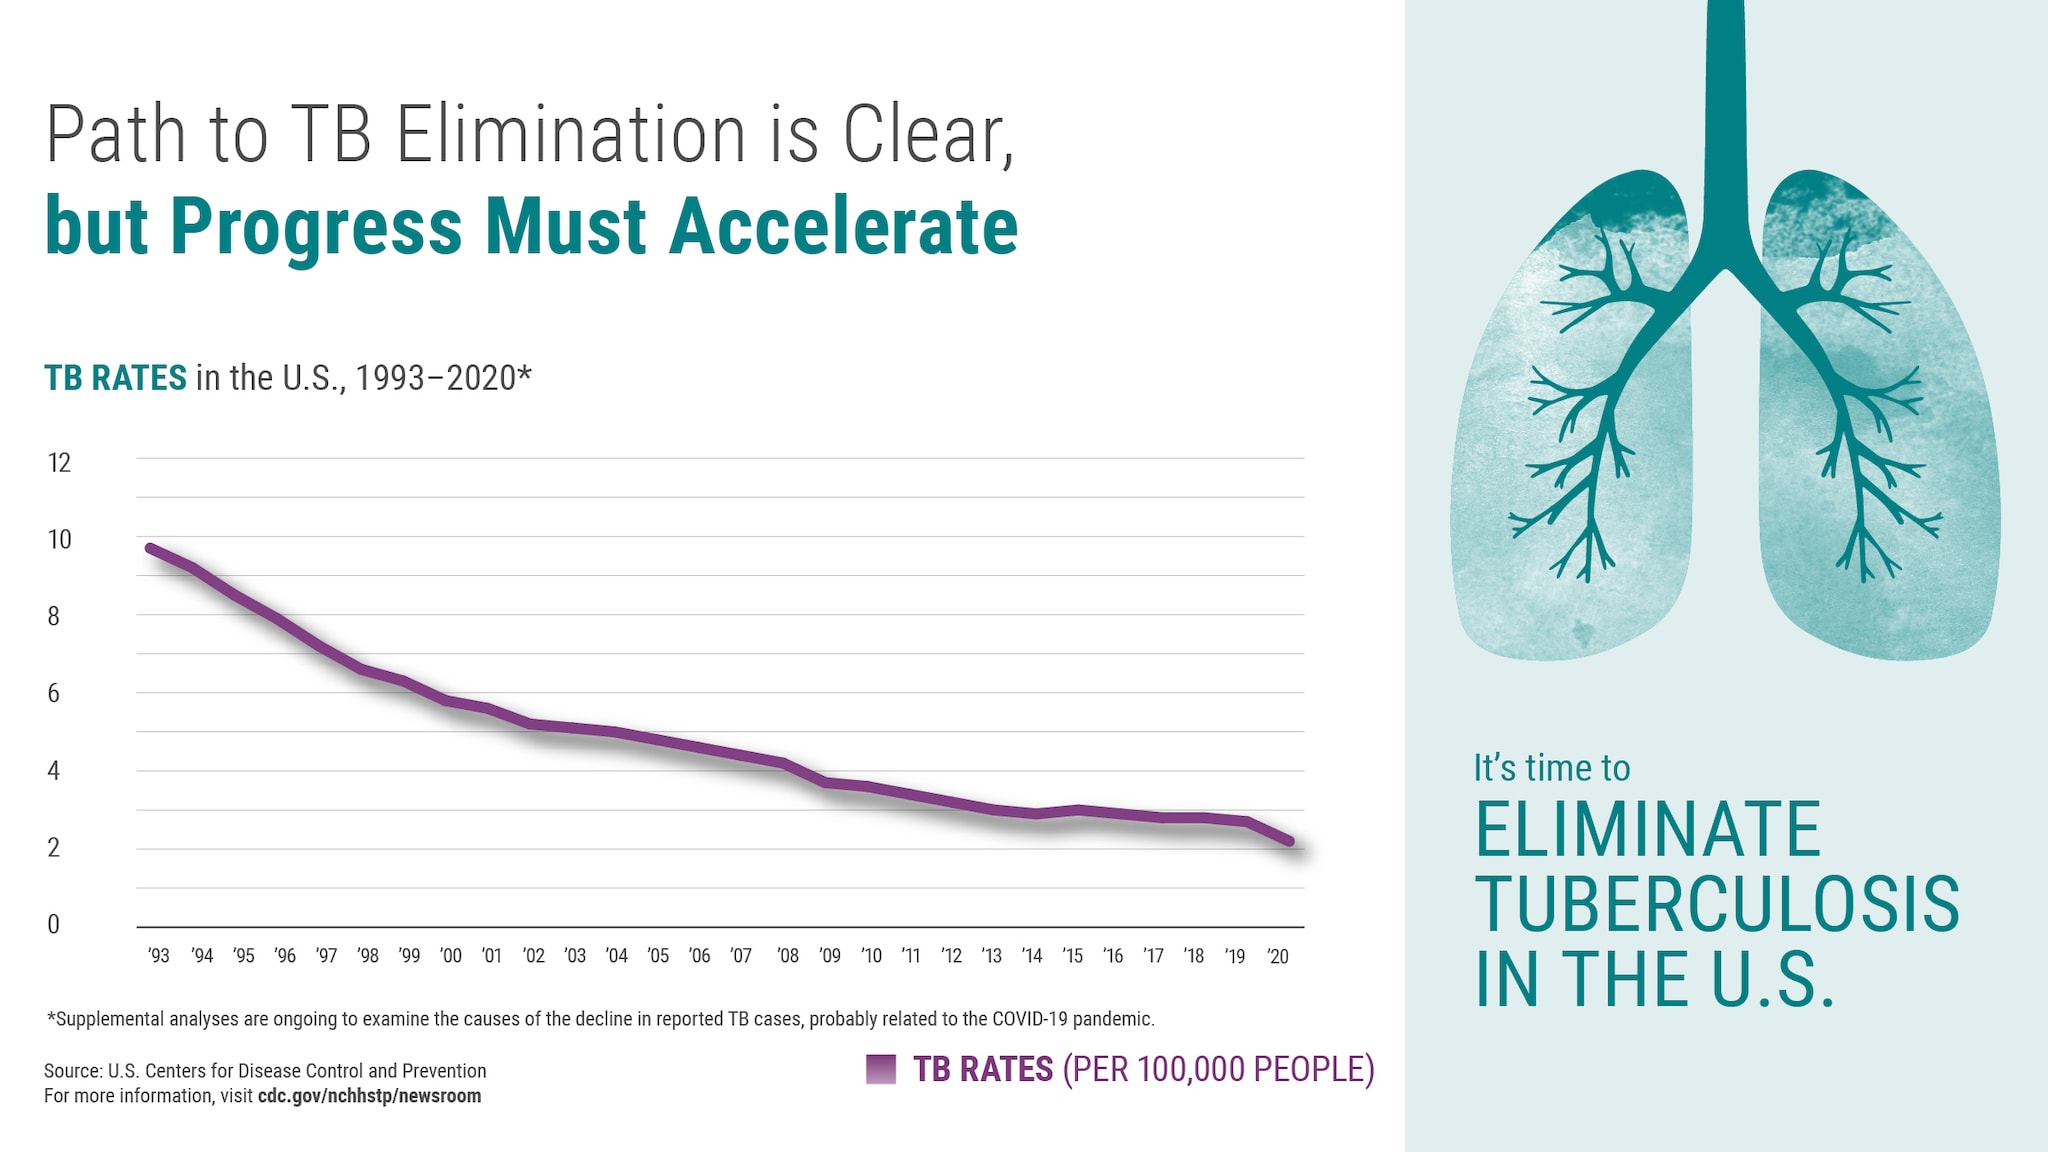 The graphic includes a line graph showing that the U.S. TB rate ranged from 9.7 in 1993 to 2.2 in 2020. 